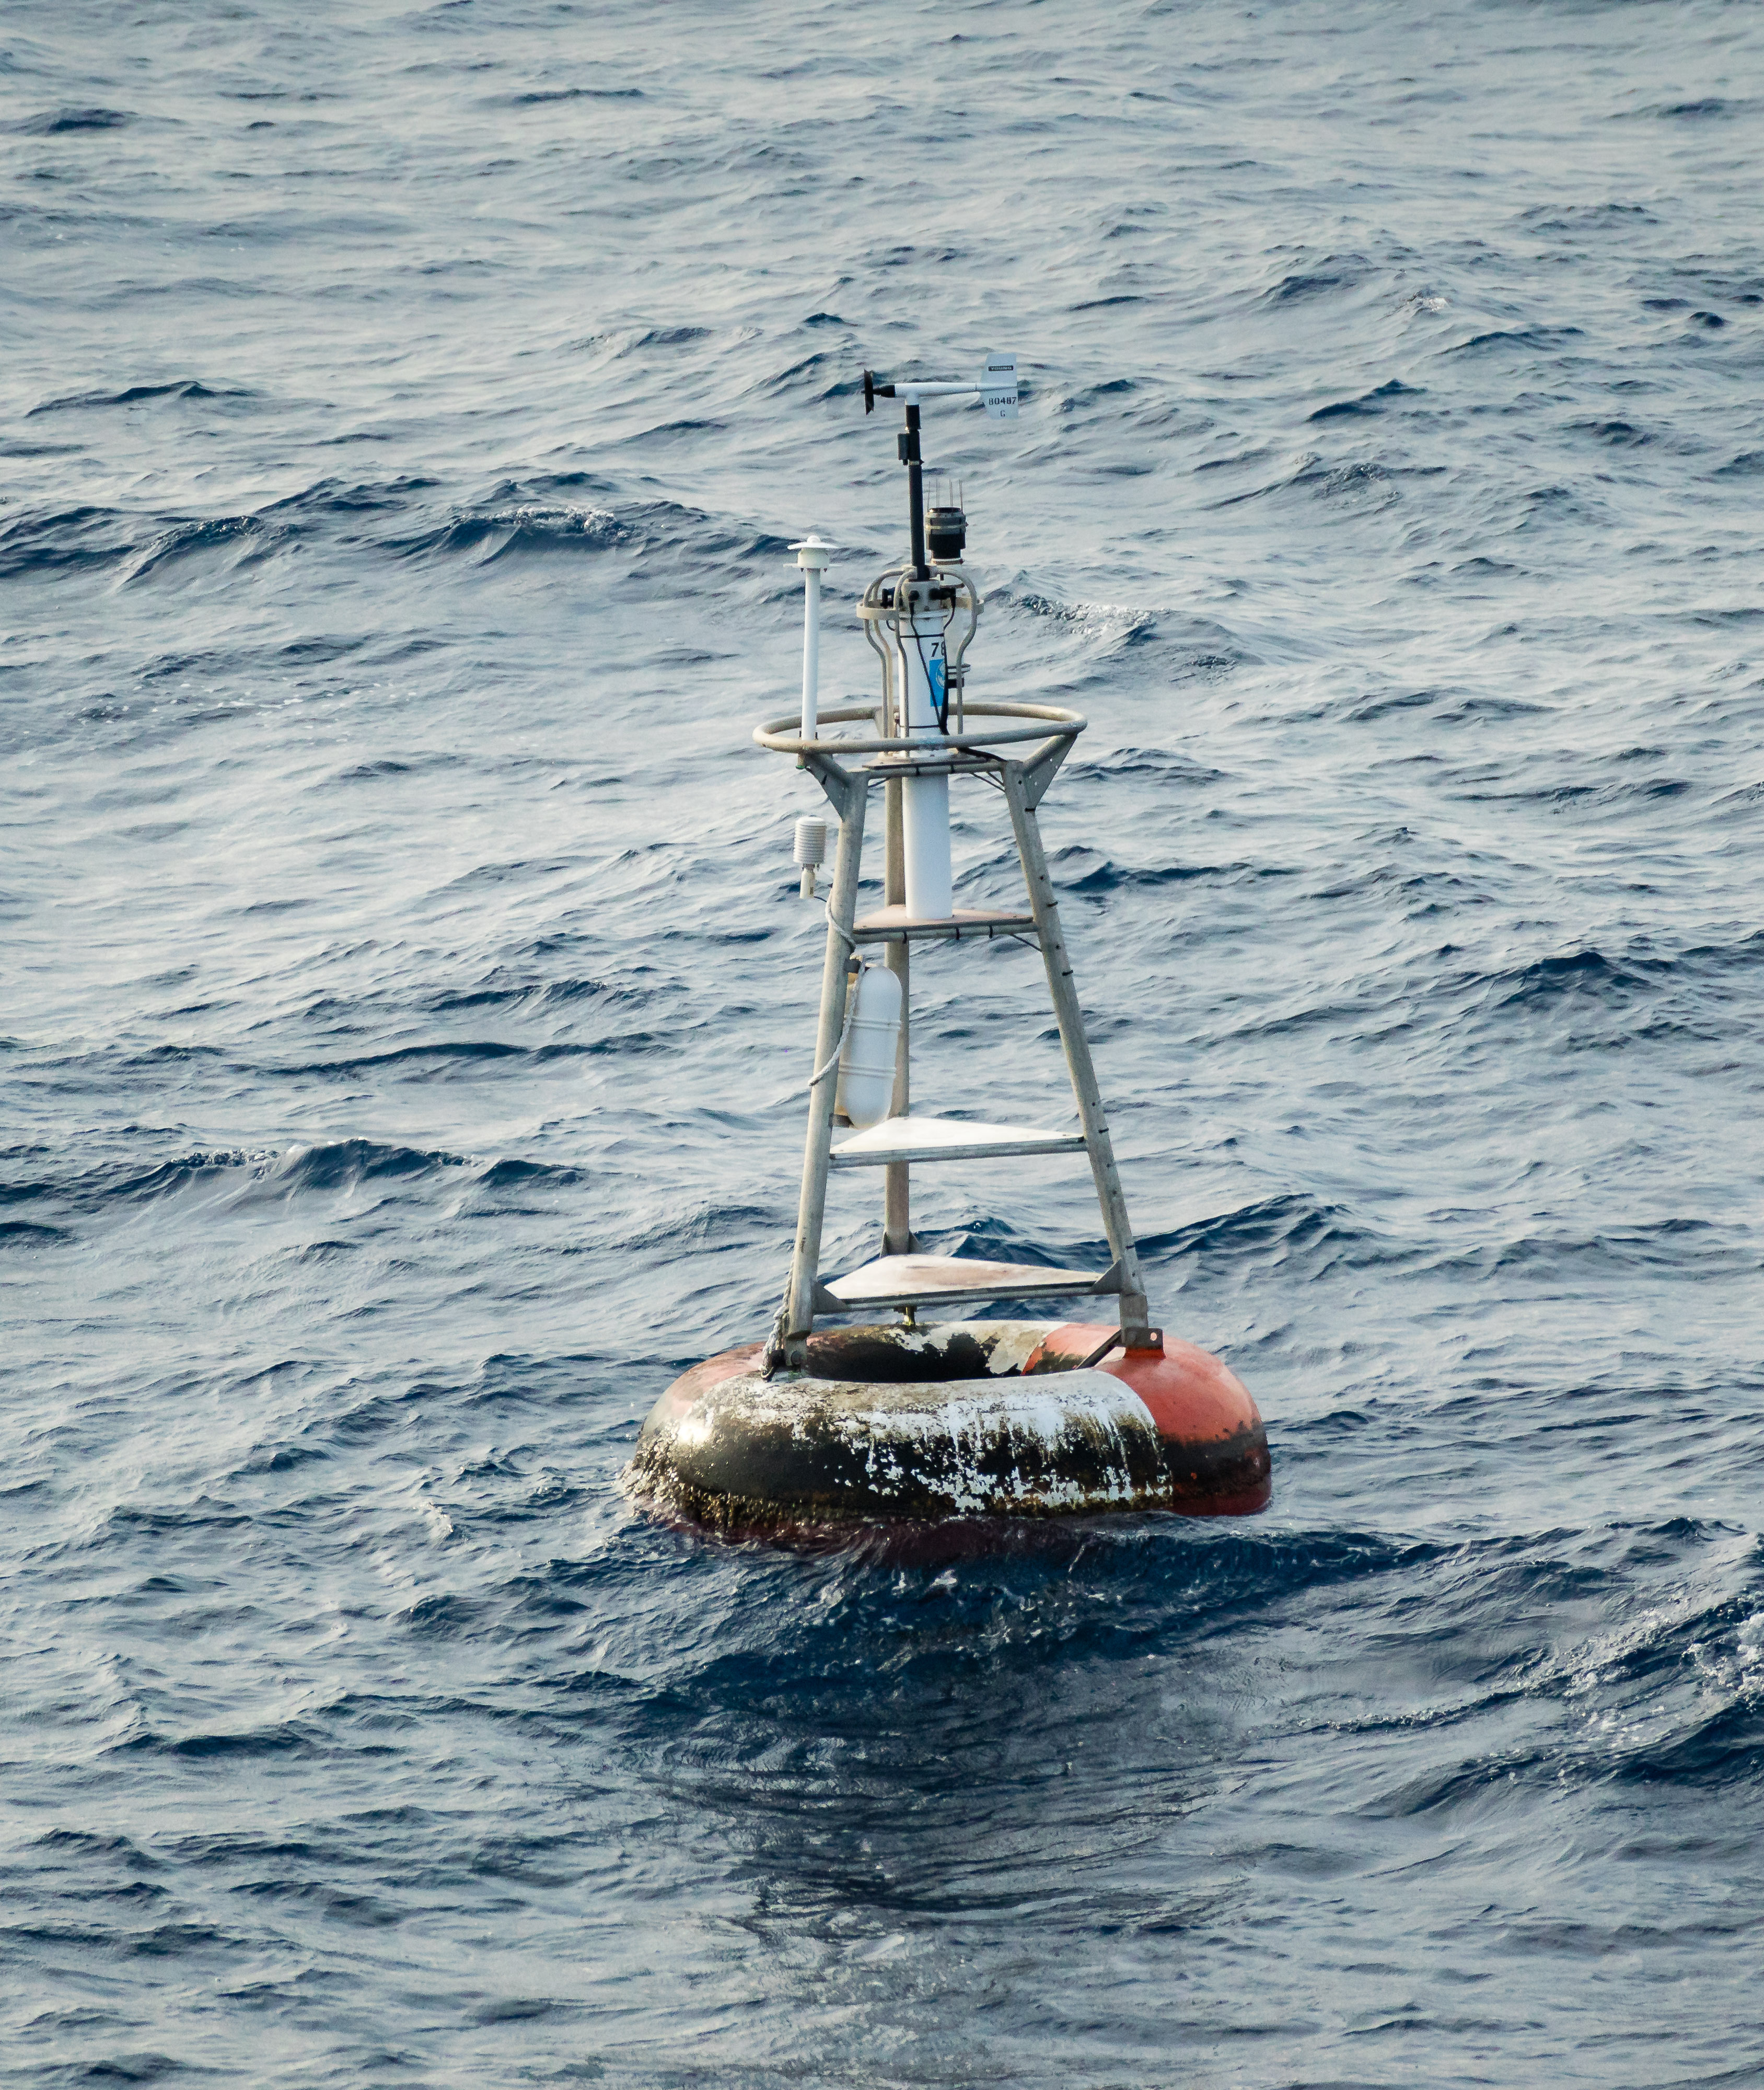 Buoy weather station in the ocean marking 0,0 